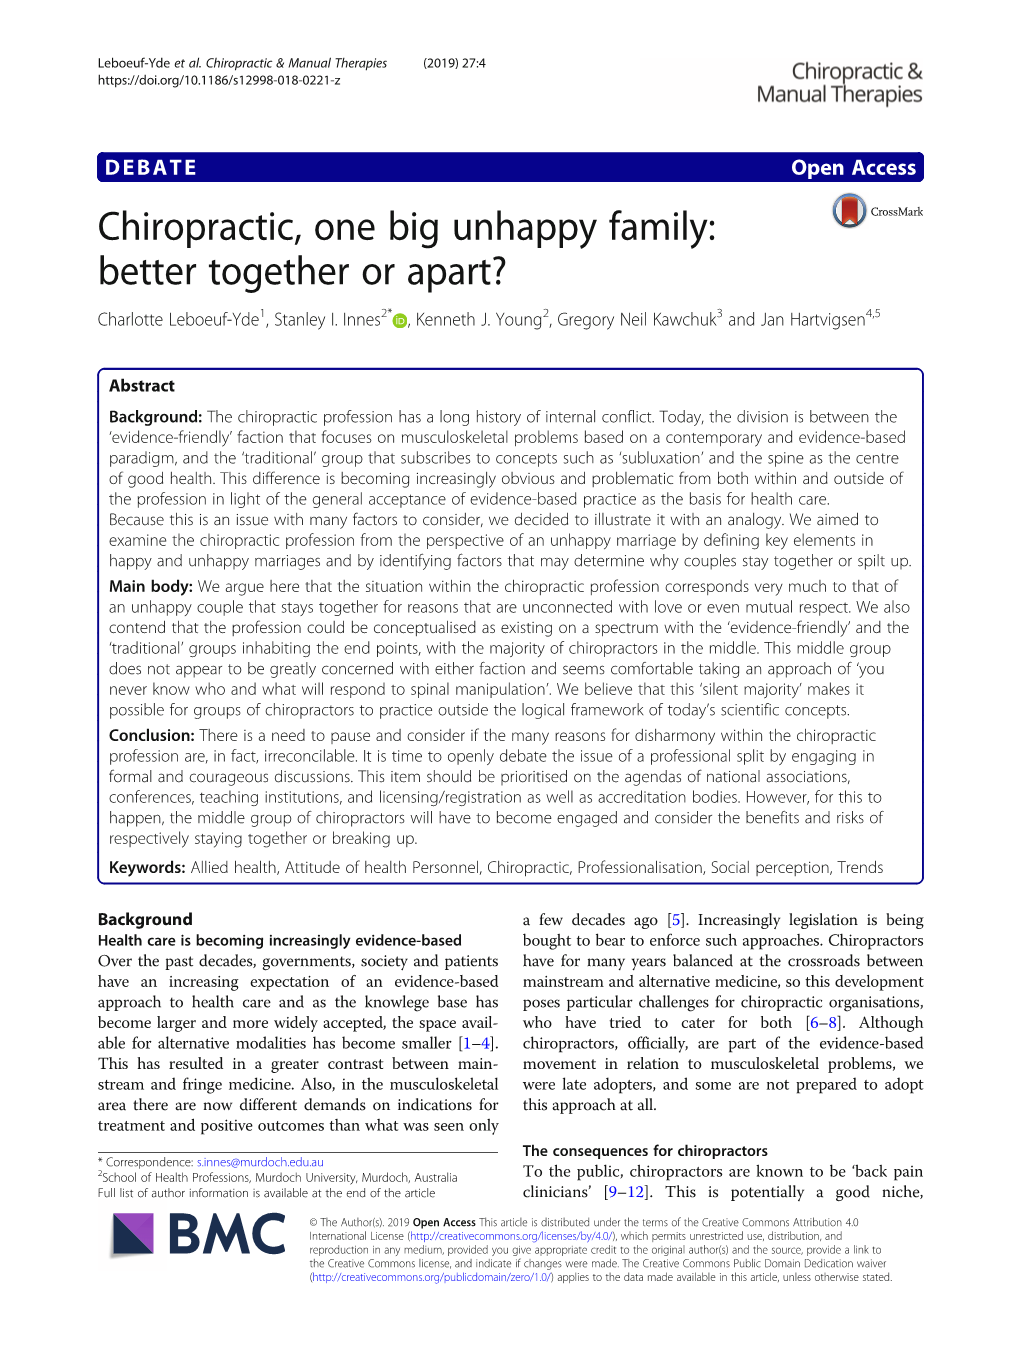 Chiropractic, One Big Unhappy Family: Better Together Or Apart? Charlotte Leboeuf-Yde1, Stanley I